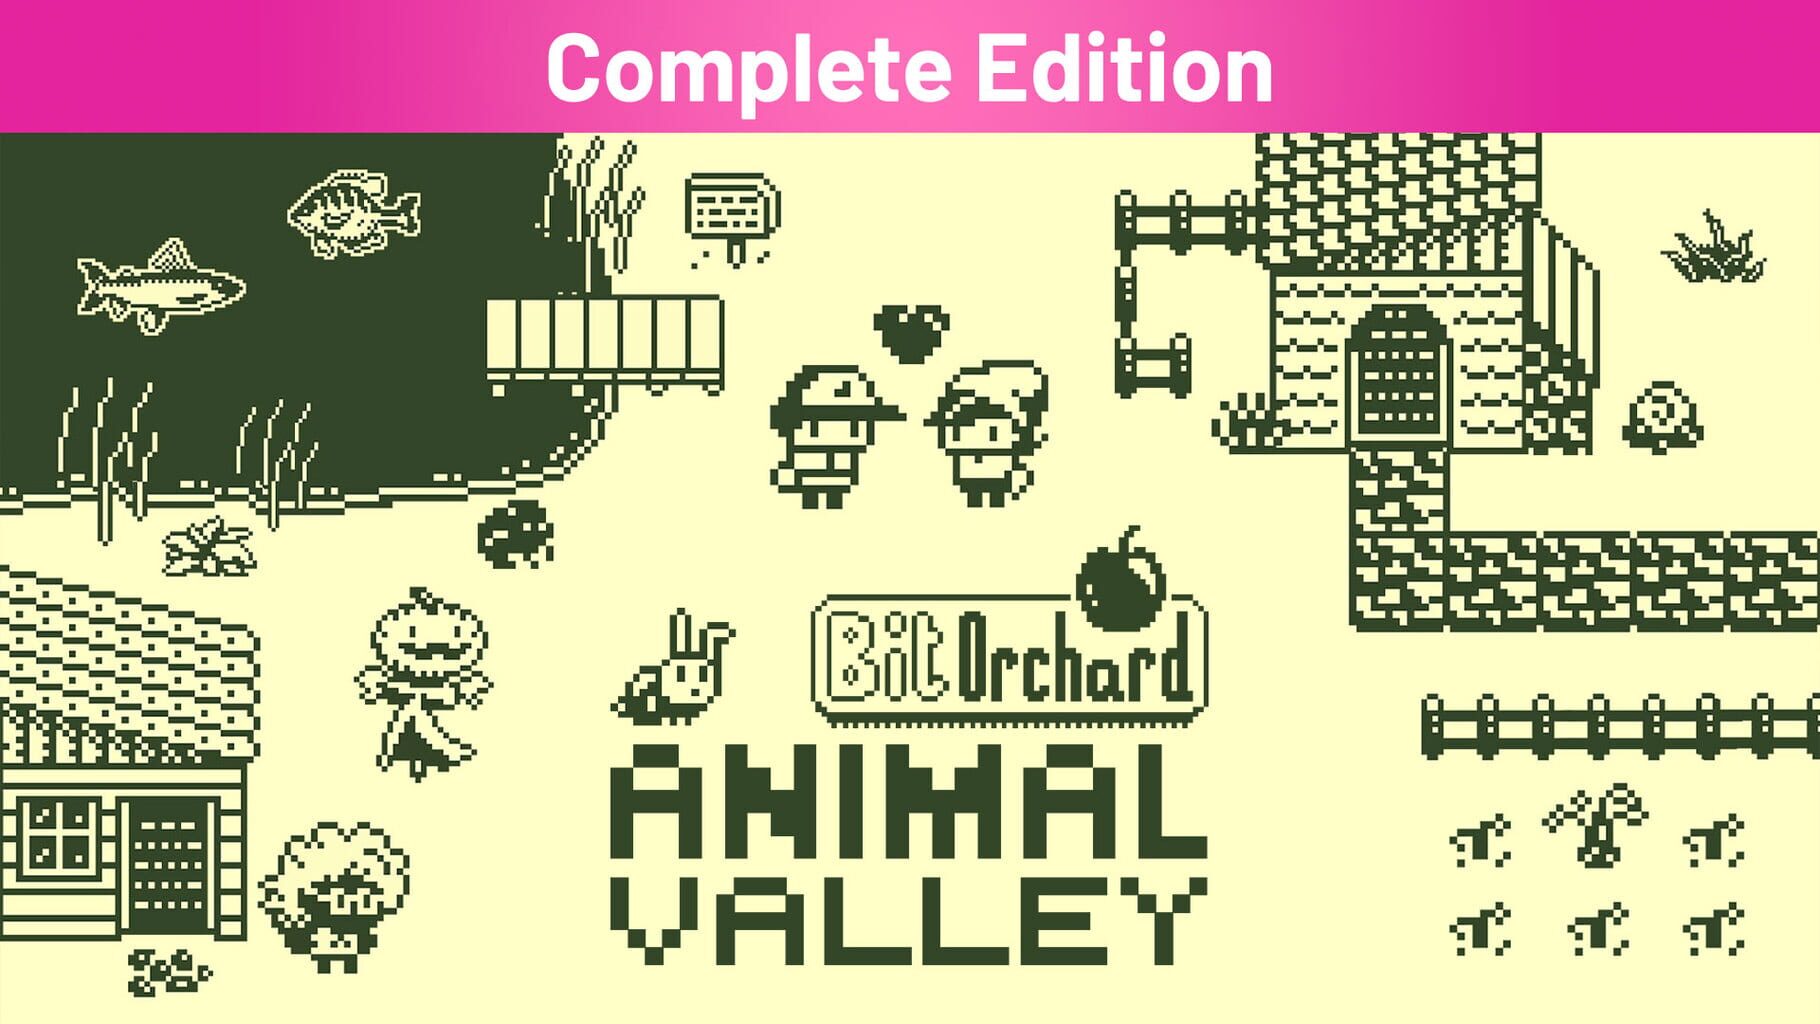 Bit Orchard: Animal Valley - Complete Edition artwork